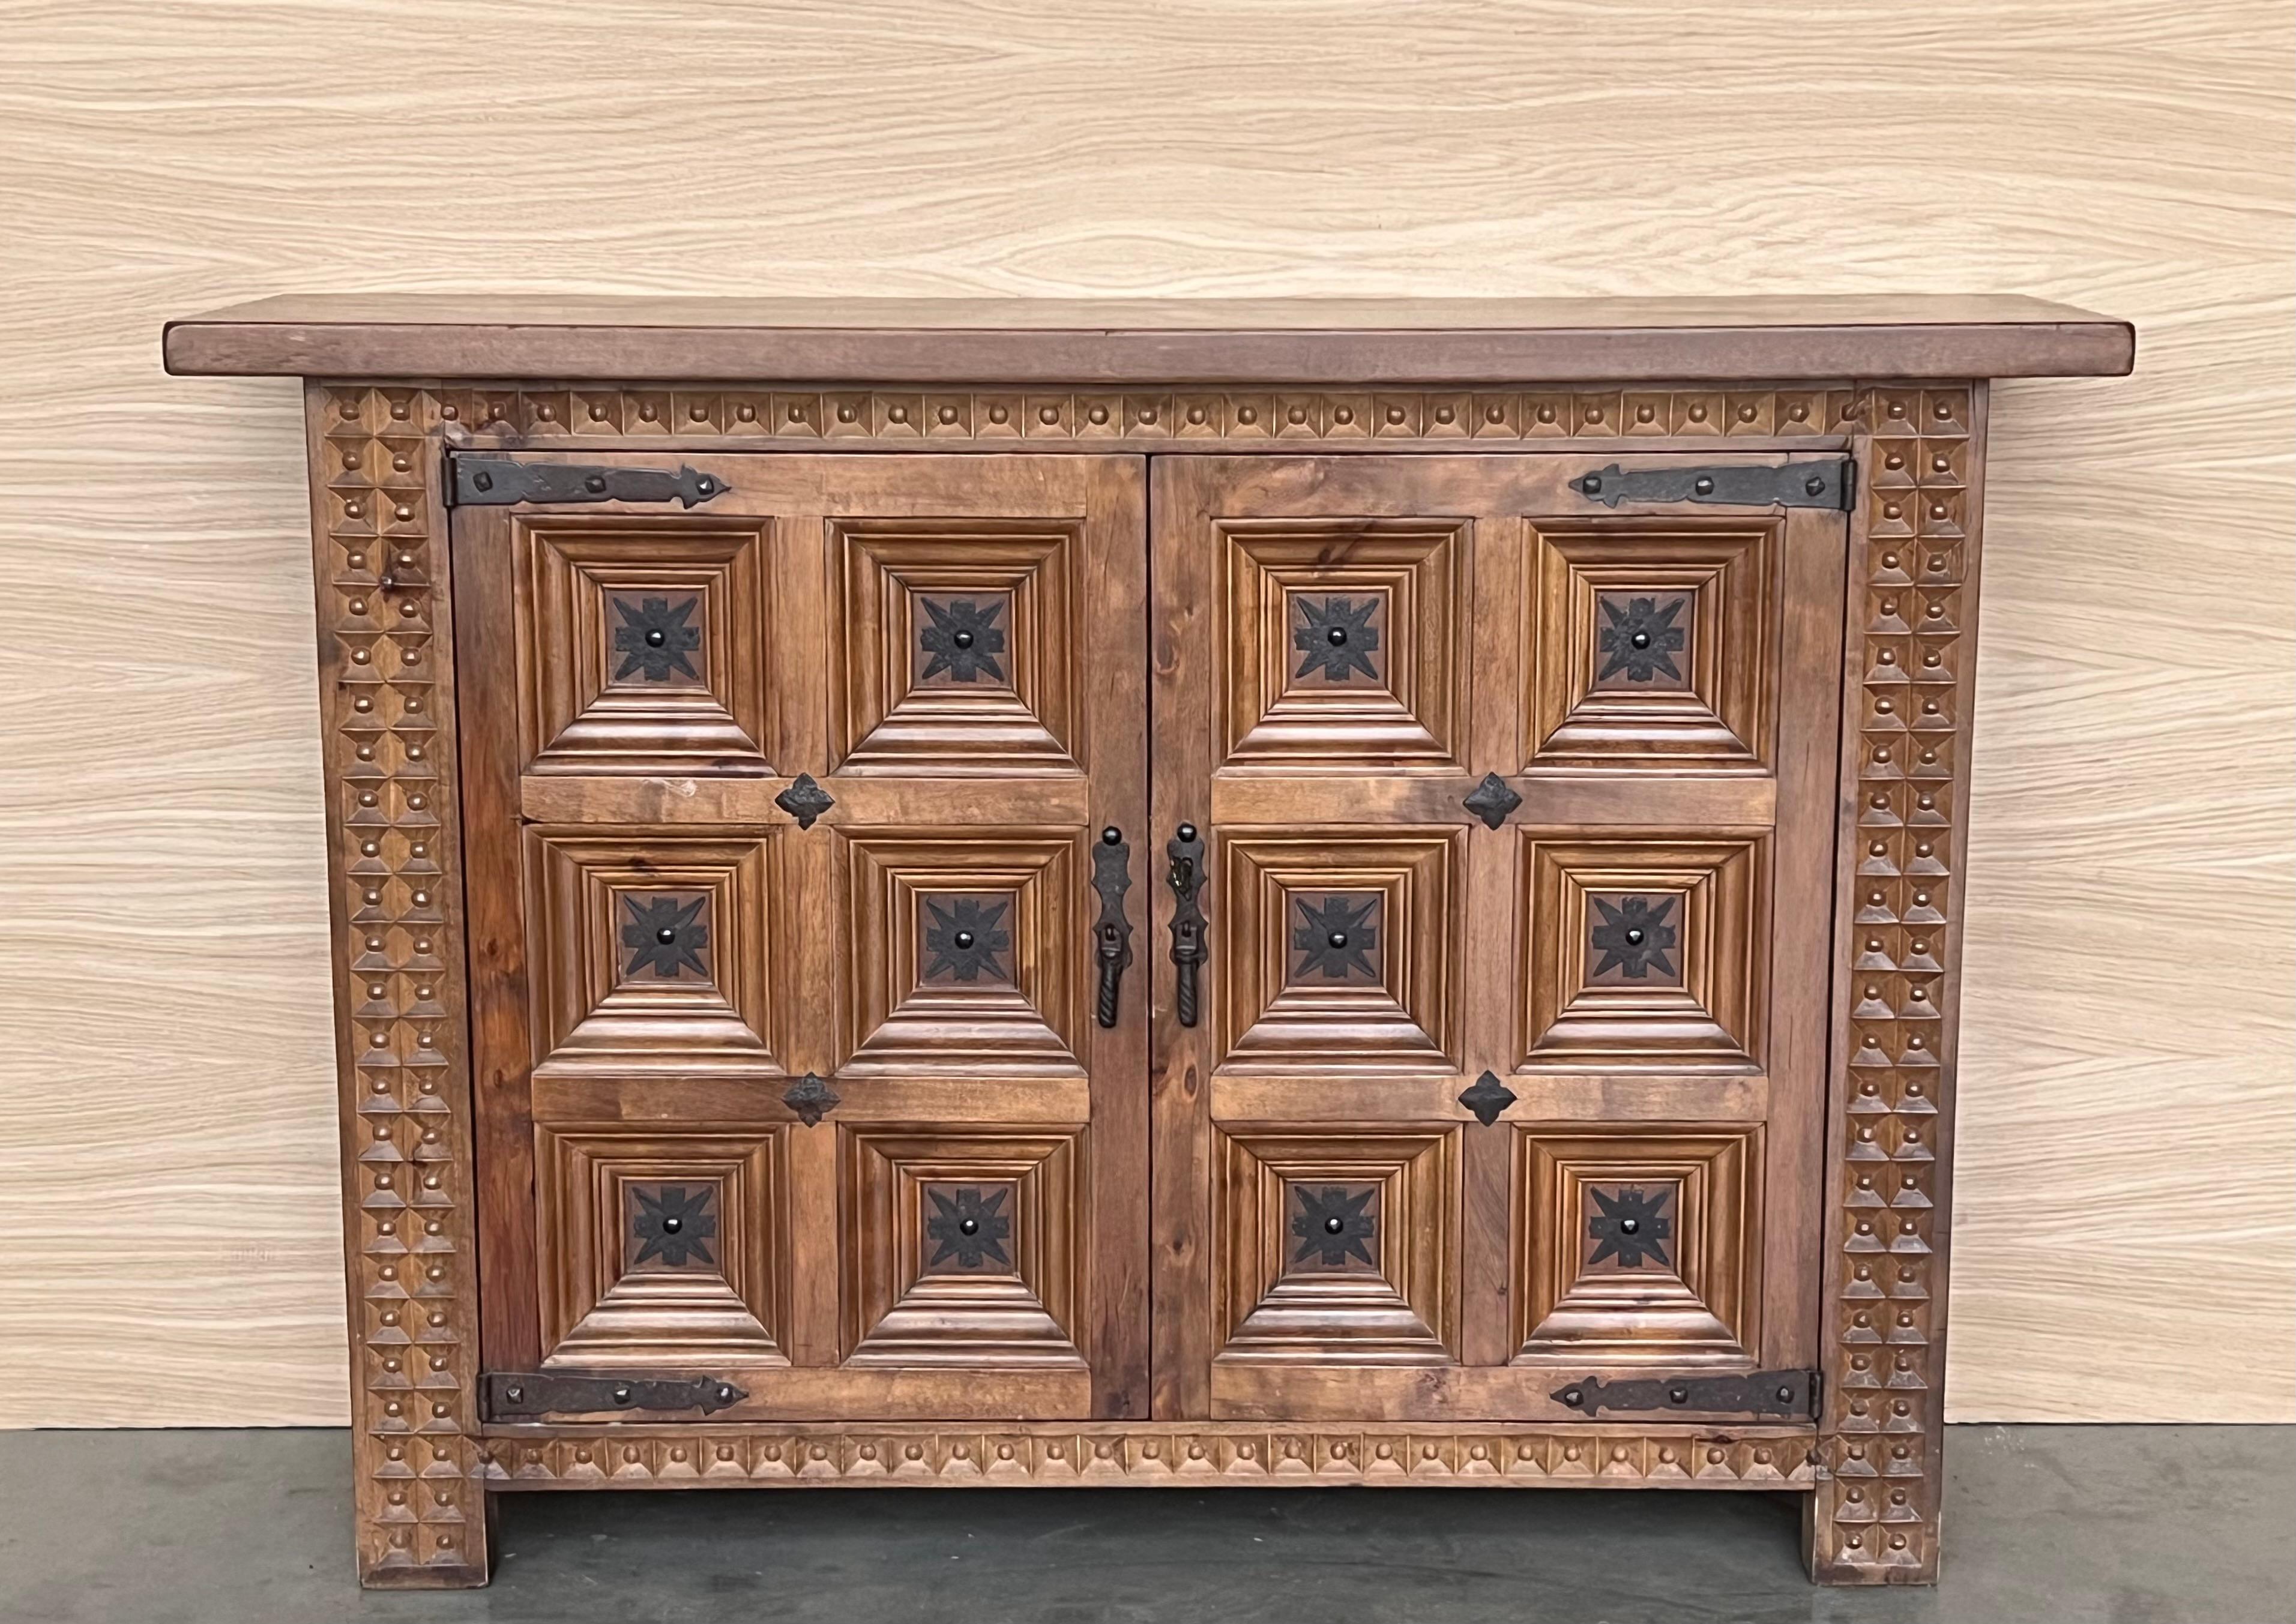 From Spain, constructed of solid oak, the rectangular top without edge top, conforming case housing two carved and paneled heavy doors with solid oak, raised on a plinth base.
Very heavy and original cabinet.
Original hardware